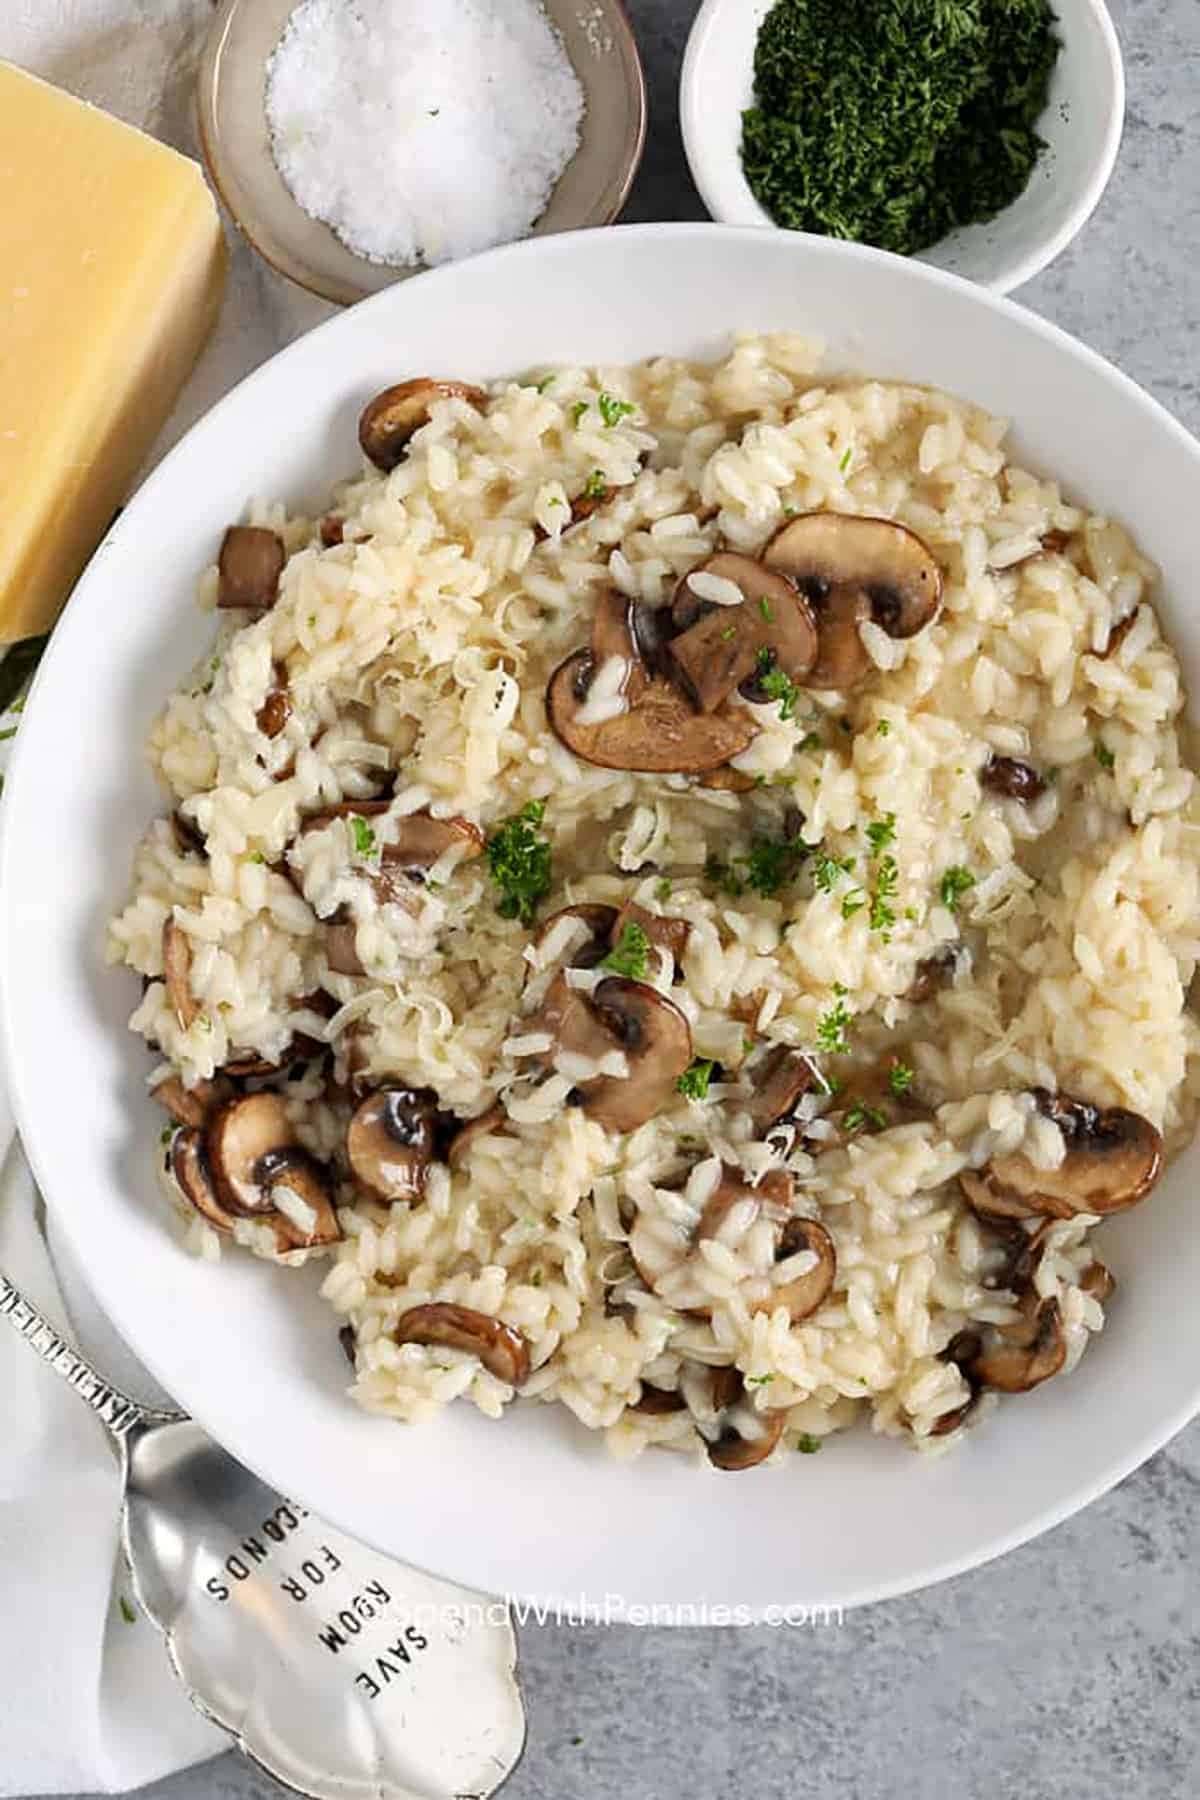 Top view of a serving of mushroom risotto on a white bowl.